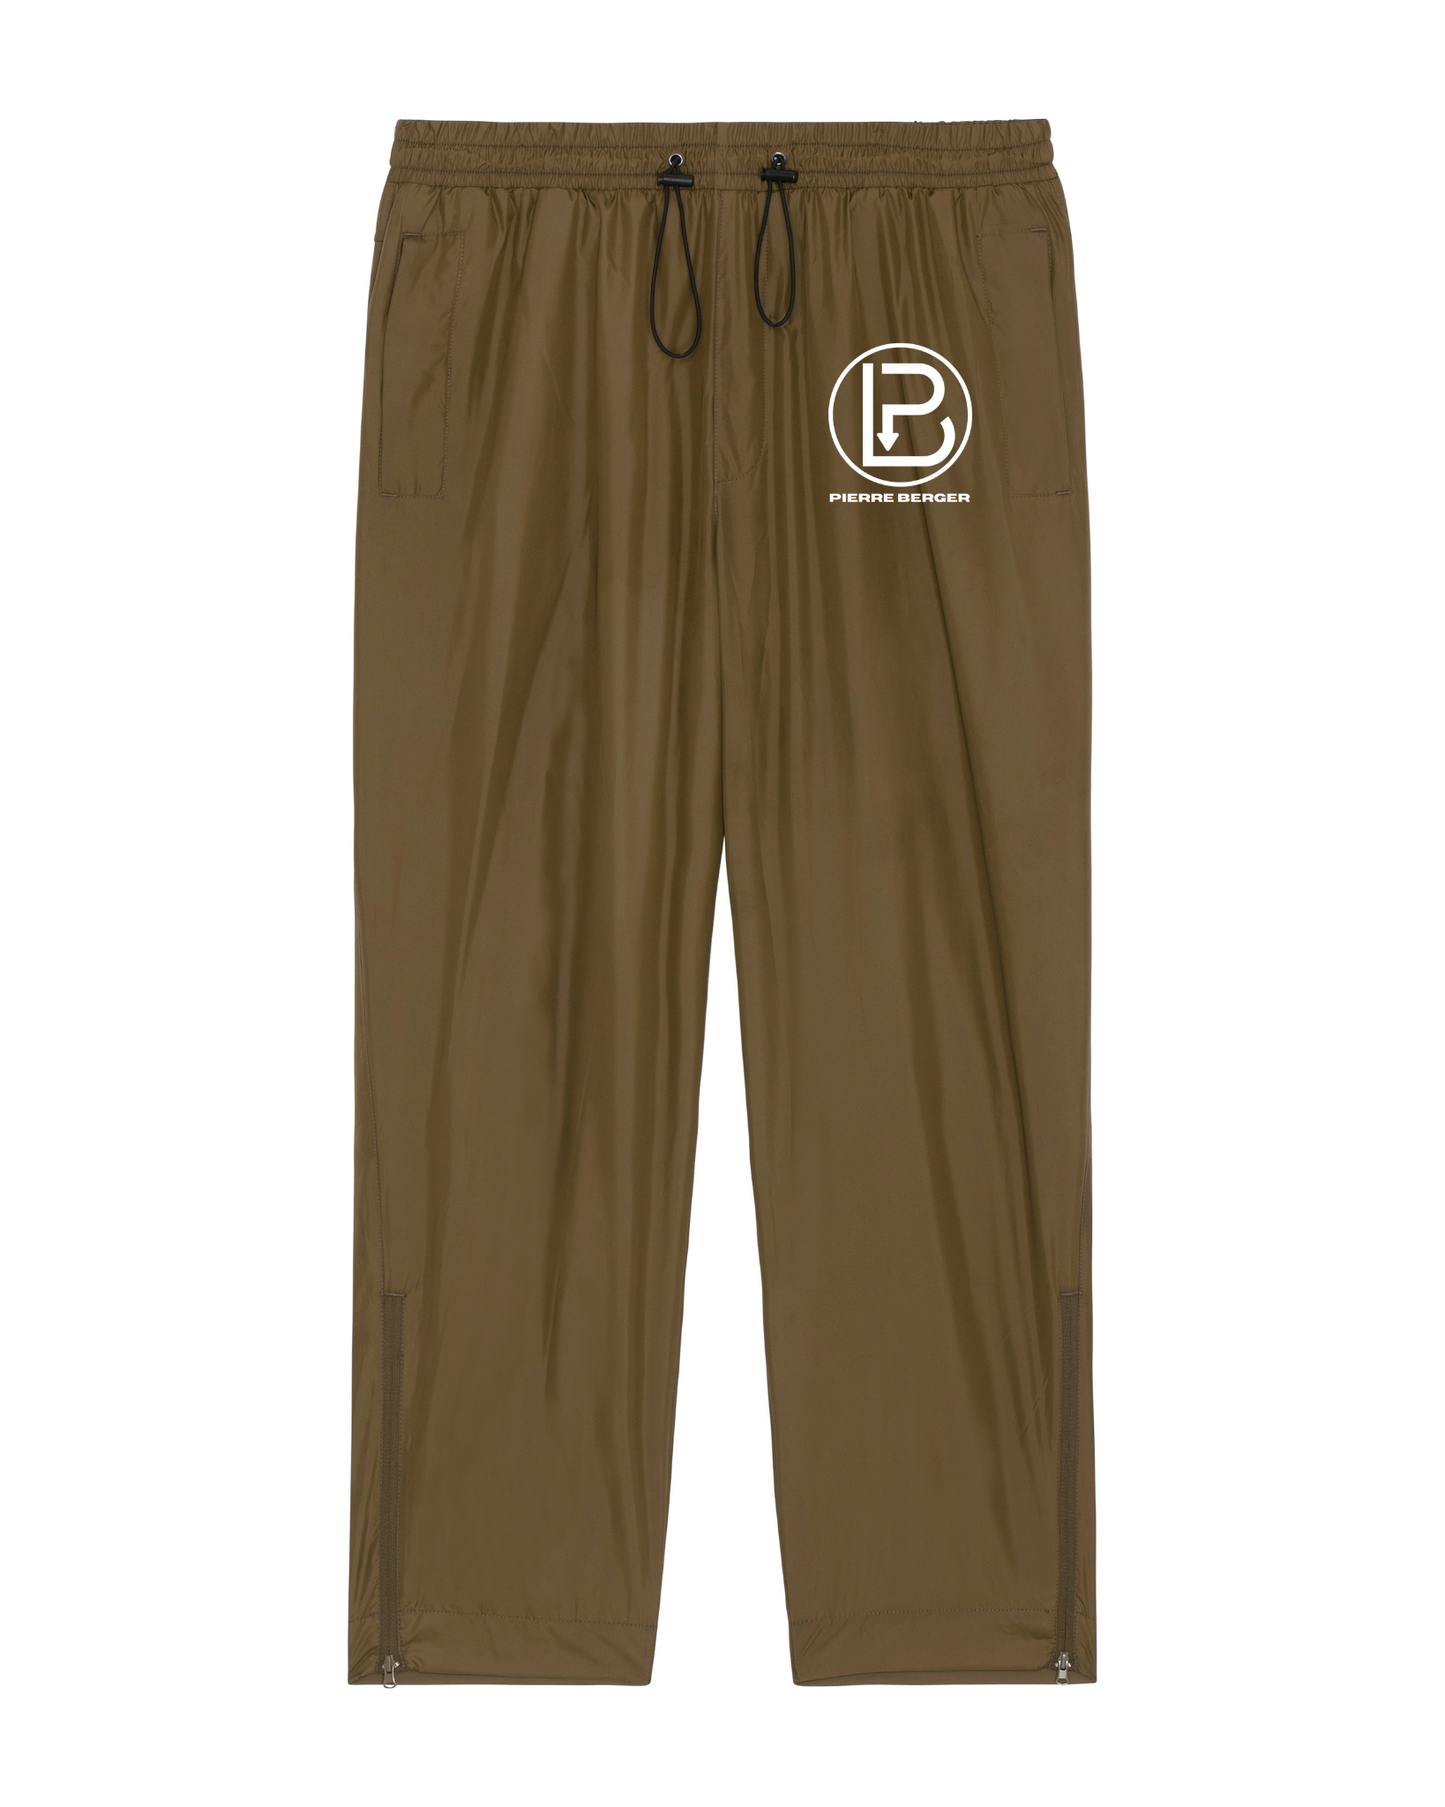 PIERRE BERGER - Unisex multifunctional trousers 100% recycled embroidery